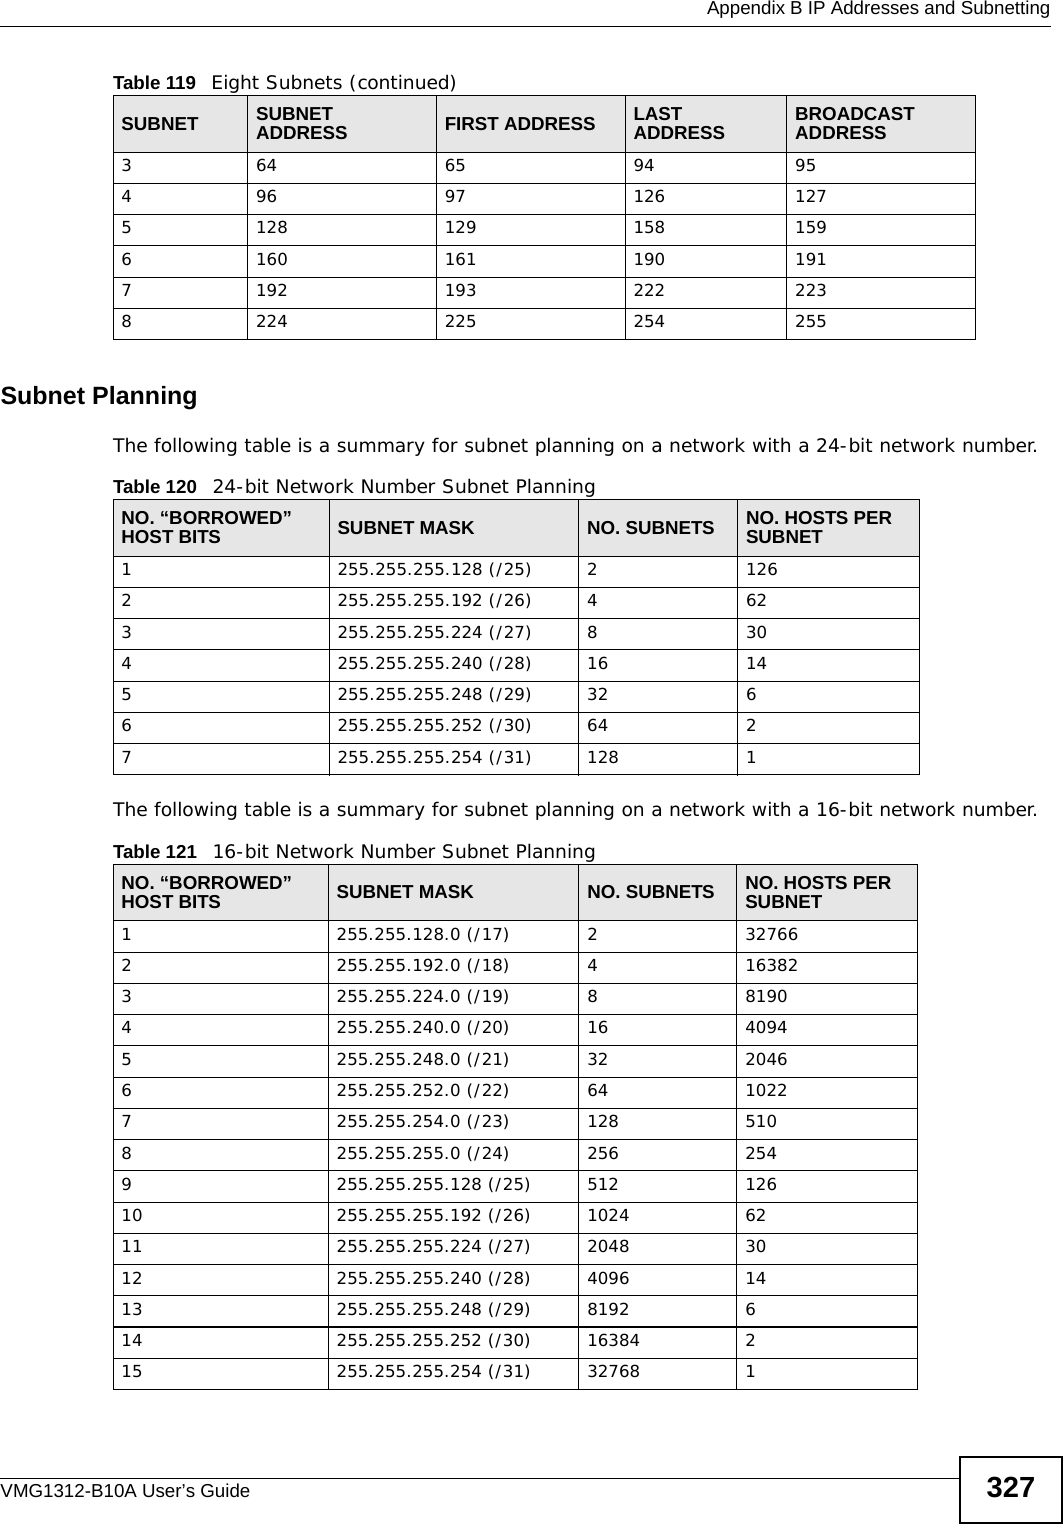  Appendix B IP Addresses and SubnettingVMG1312-B10A User’s Guide 327Subnet PlanningThe following table is a summary for subnet planning on a network with a 24-bit network number.The following table is a summary for subnet planning on a network with a 16-bit network number. 364 65 94 95496 97 126 1275128 129 158 1596160 161 190 1917192 193 222 2238224 225 254 255Table 119   Eight Subnets (continued)SUBNET SUBNET ADDRESS FIRST ADDRESS LAST ADDRESS BROADCAST ADDRESSTable 120   24-bit Network Number Subnet PlanningNO. “BORROWED” HOST BITS SUBNET MASK NO. SUBNETS NO. HOSTS PER SUBNET1255.255.255.128 (/25) 21262255.255.255.192 (/26) 4623255.255.255.224 (/27) 8304255.255.255.240 (/28) 16 145255.255.255.248 (/29) 32 66255.255.255.252 (/30) 64 27255.255.255.254 (/31) 128 1Table 121   16-bit Network Number Subnet PlanningNO. “BORROWED” HOST BITS SUBNET MASK NO. SUBNETS NO. HOSTS PER SUBNET1255.255.128.0 (/17) 2327662255.255.192.0 (/18) 4163823255.255.224.0 (/19) 881904255.255.240.0 (/20) 16 40945255.255.248.0 (/21) 32 20466255.255.252.0 (/22) 64 10227255.255.254.0 (/23) 128 5108255.255.255.0 (/24) 256 2549255.255.255.128 (/25) 512 12610 255.255.255.192 (/26) 1024 6211 255.255.255.224 (/27) 2048 3012 255.255.255.240 (/28) 4096 1413 255.255.255.248 (/29) 8192 614 255.255.255.252 (/30) 16384 215 255.255.255.254 (/31) 32768 1